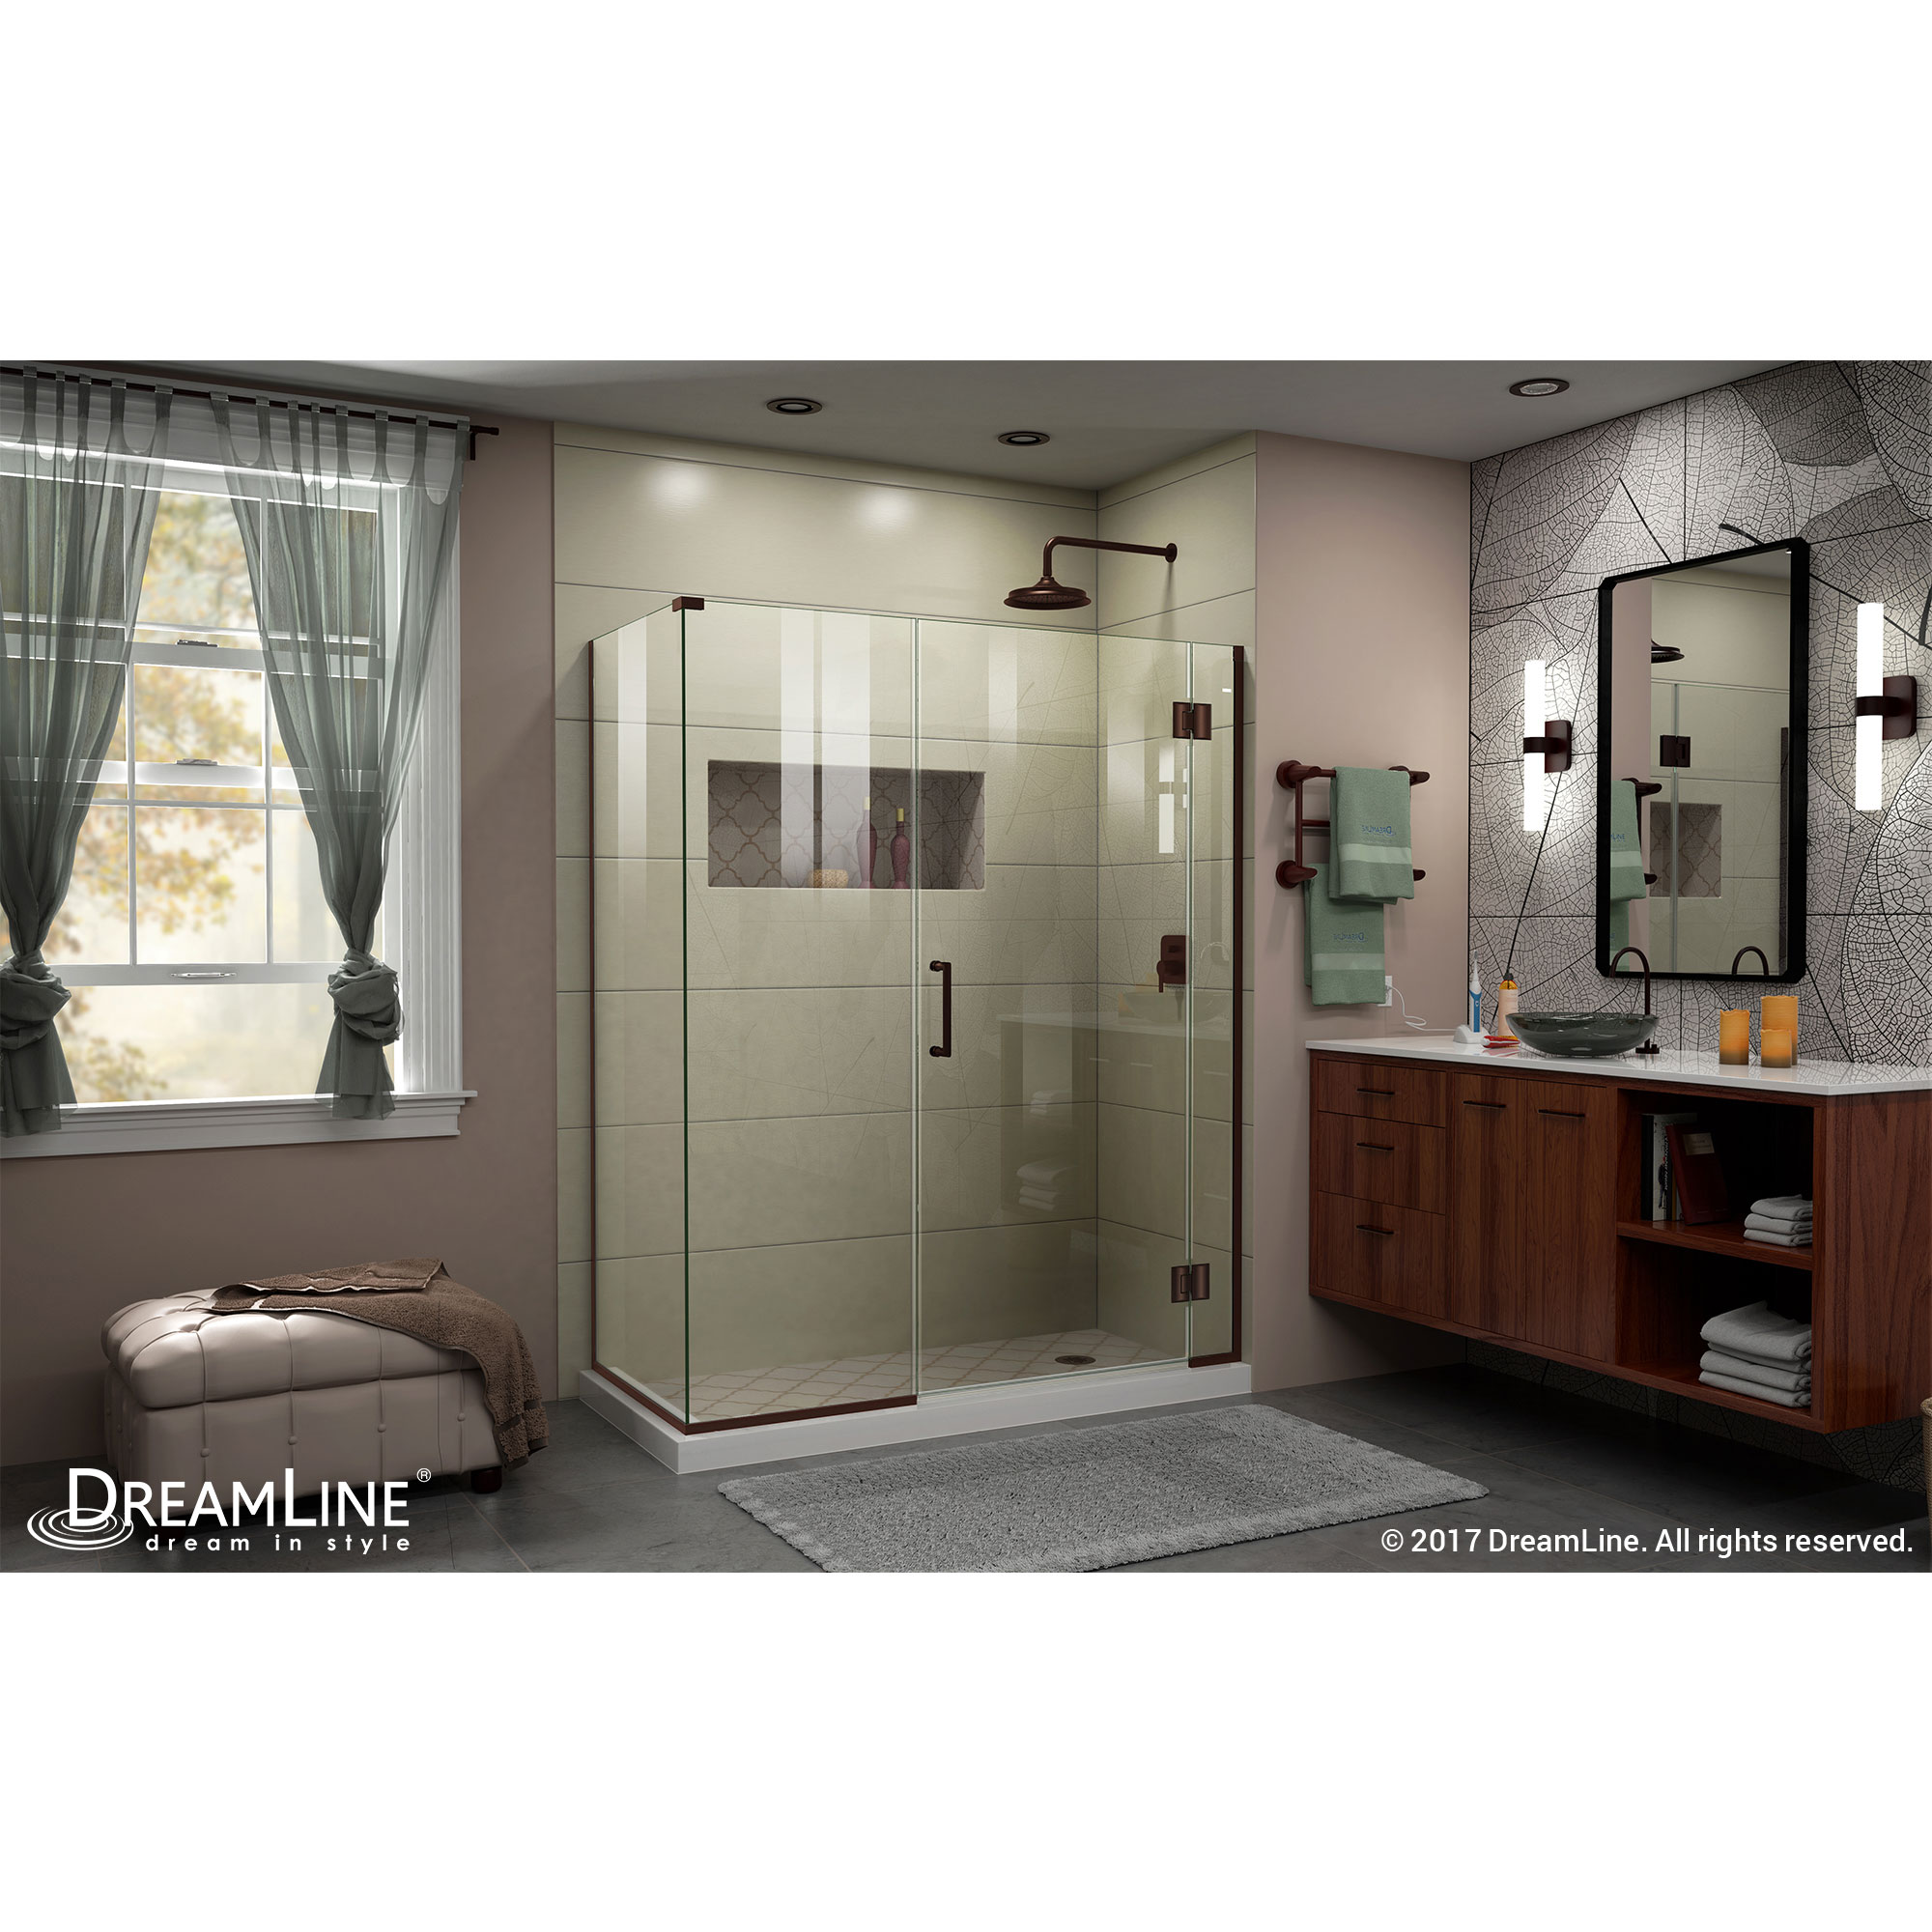 DreamLine Unidoor-X 52 in. W x 34 3/8 in. D x 72 in. H Frameless Hinged Shower Enclosure in Oil Rubbed Bronze